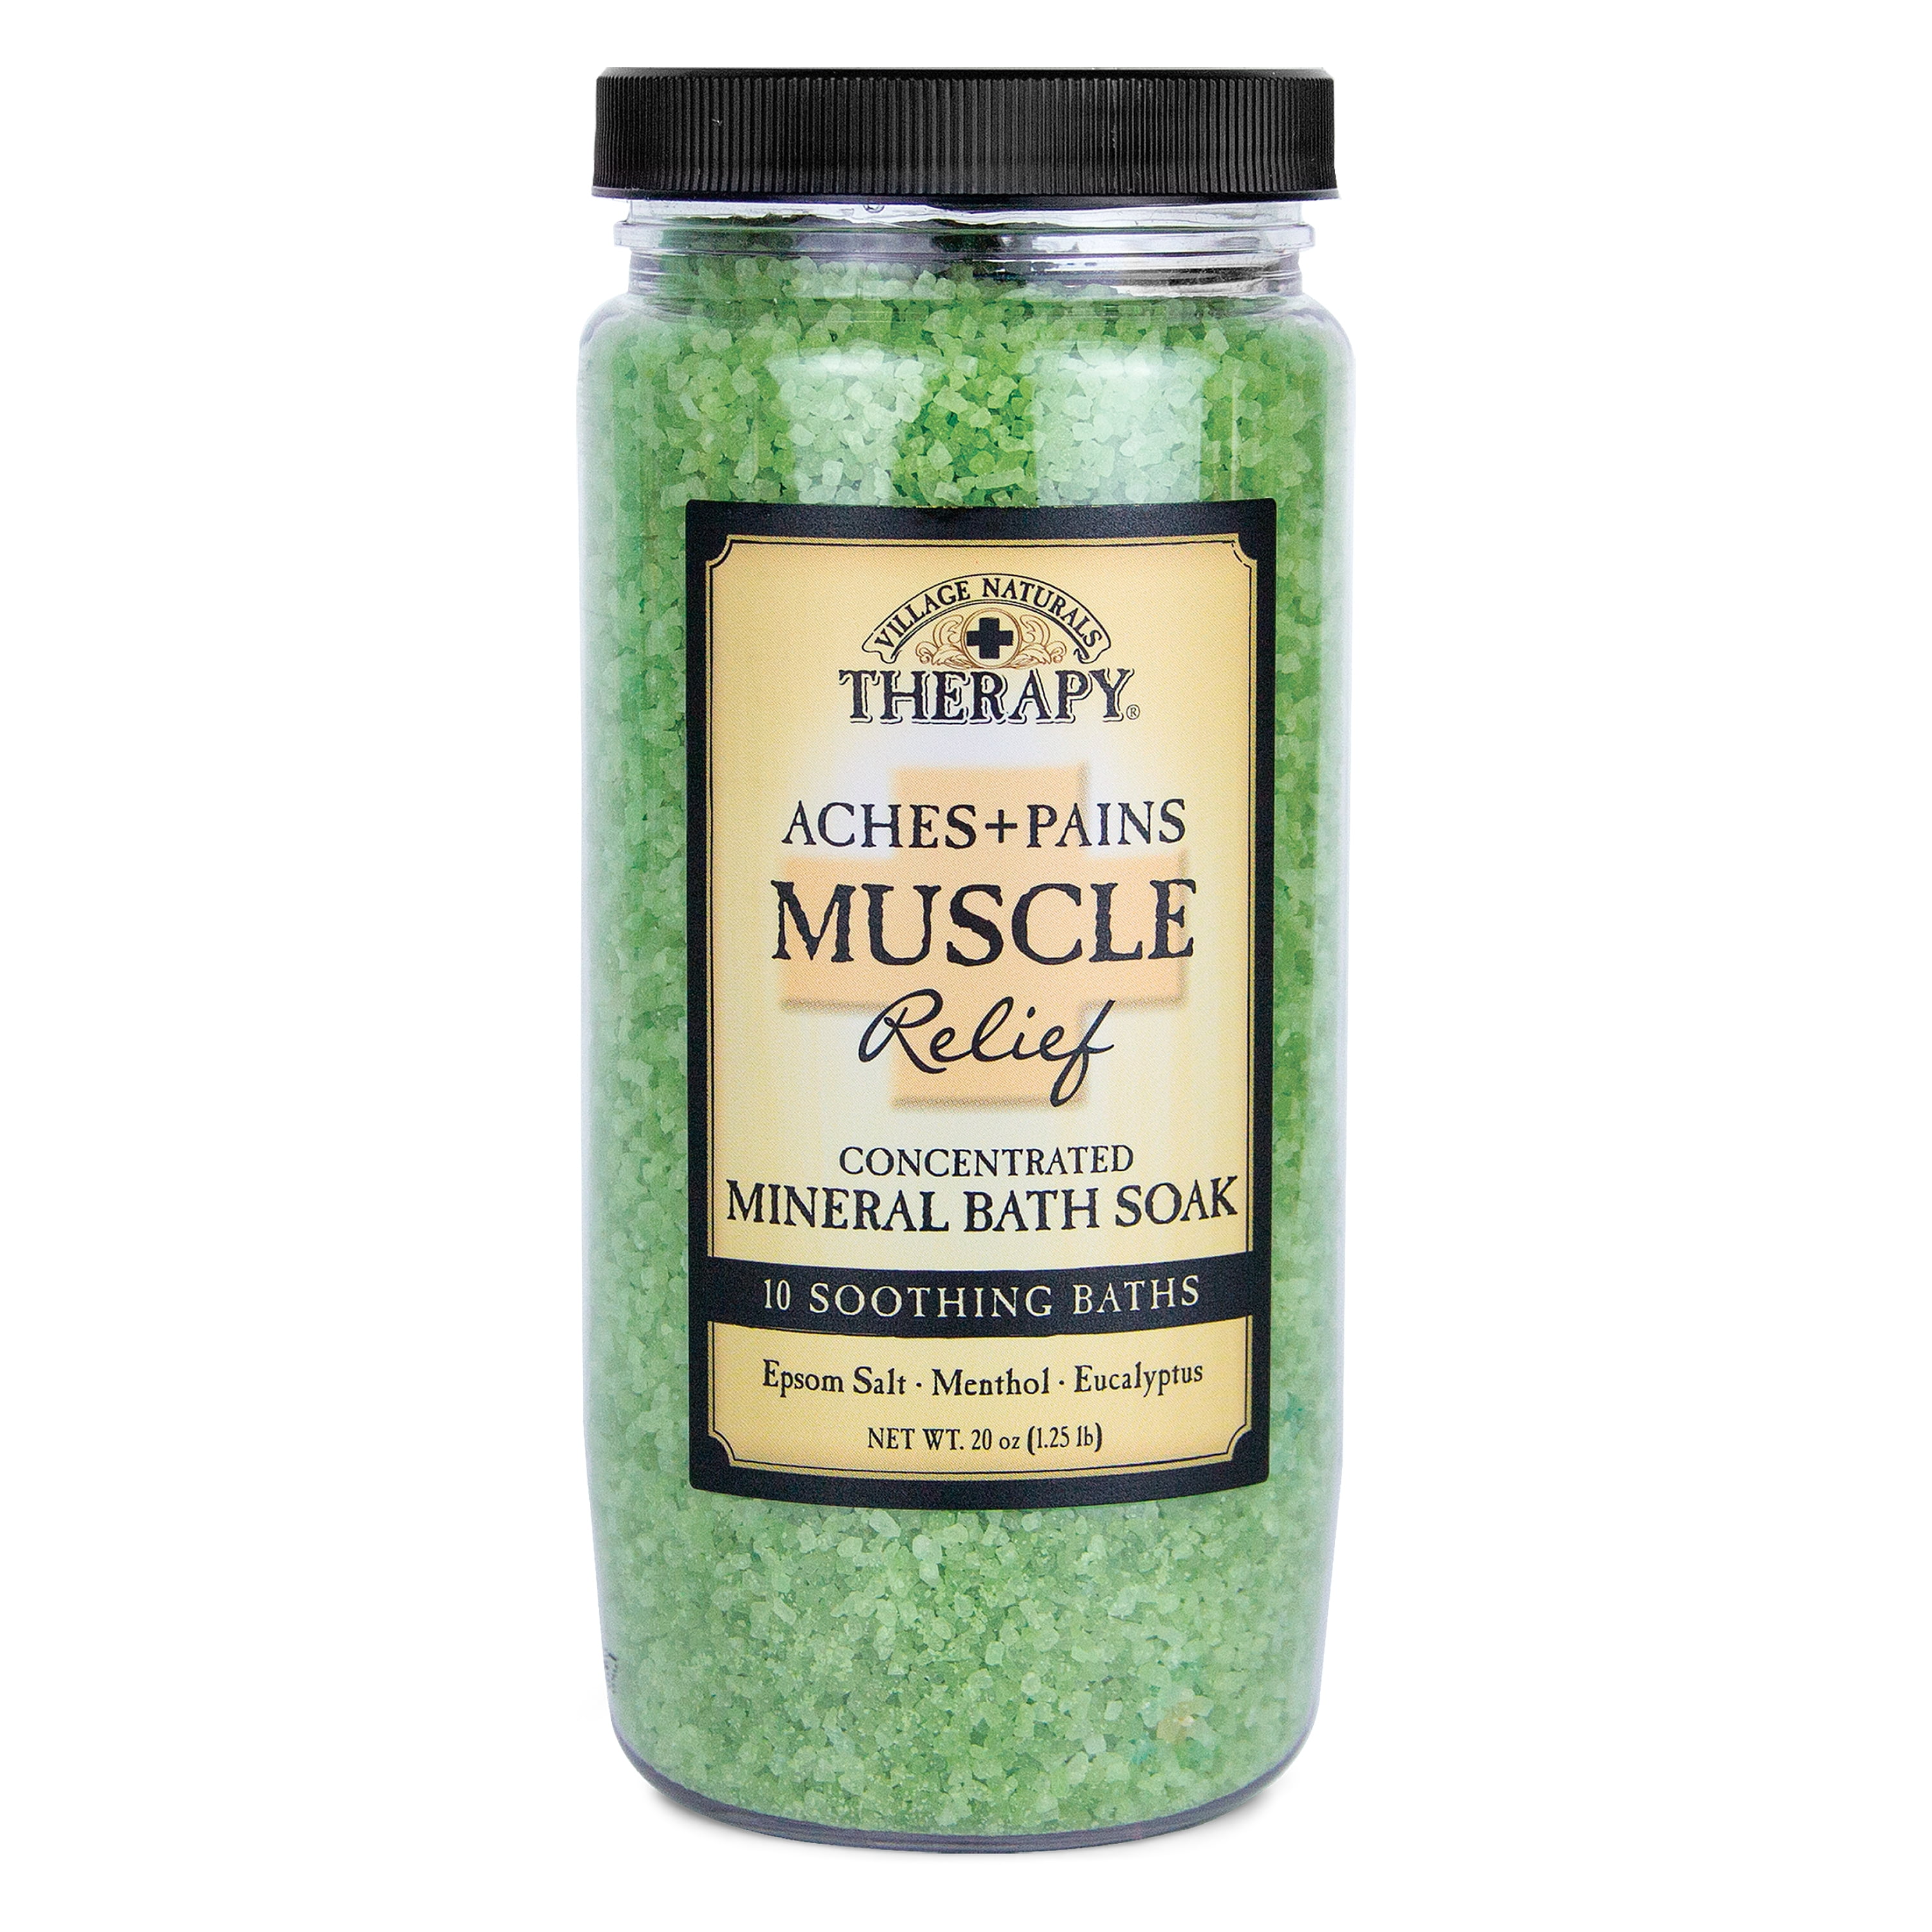 Village Naturals Therapy Aches & Pains Muscle Relief Mineral Bath Soak, 20 oz